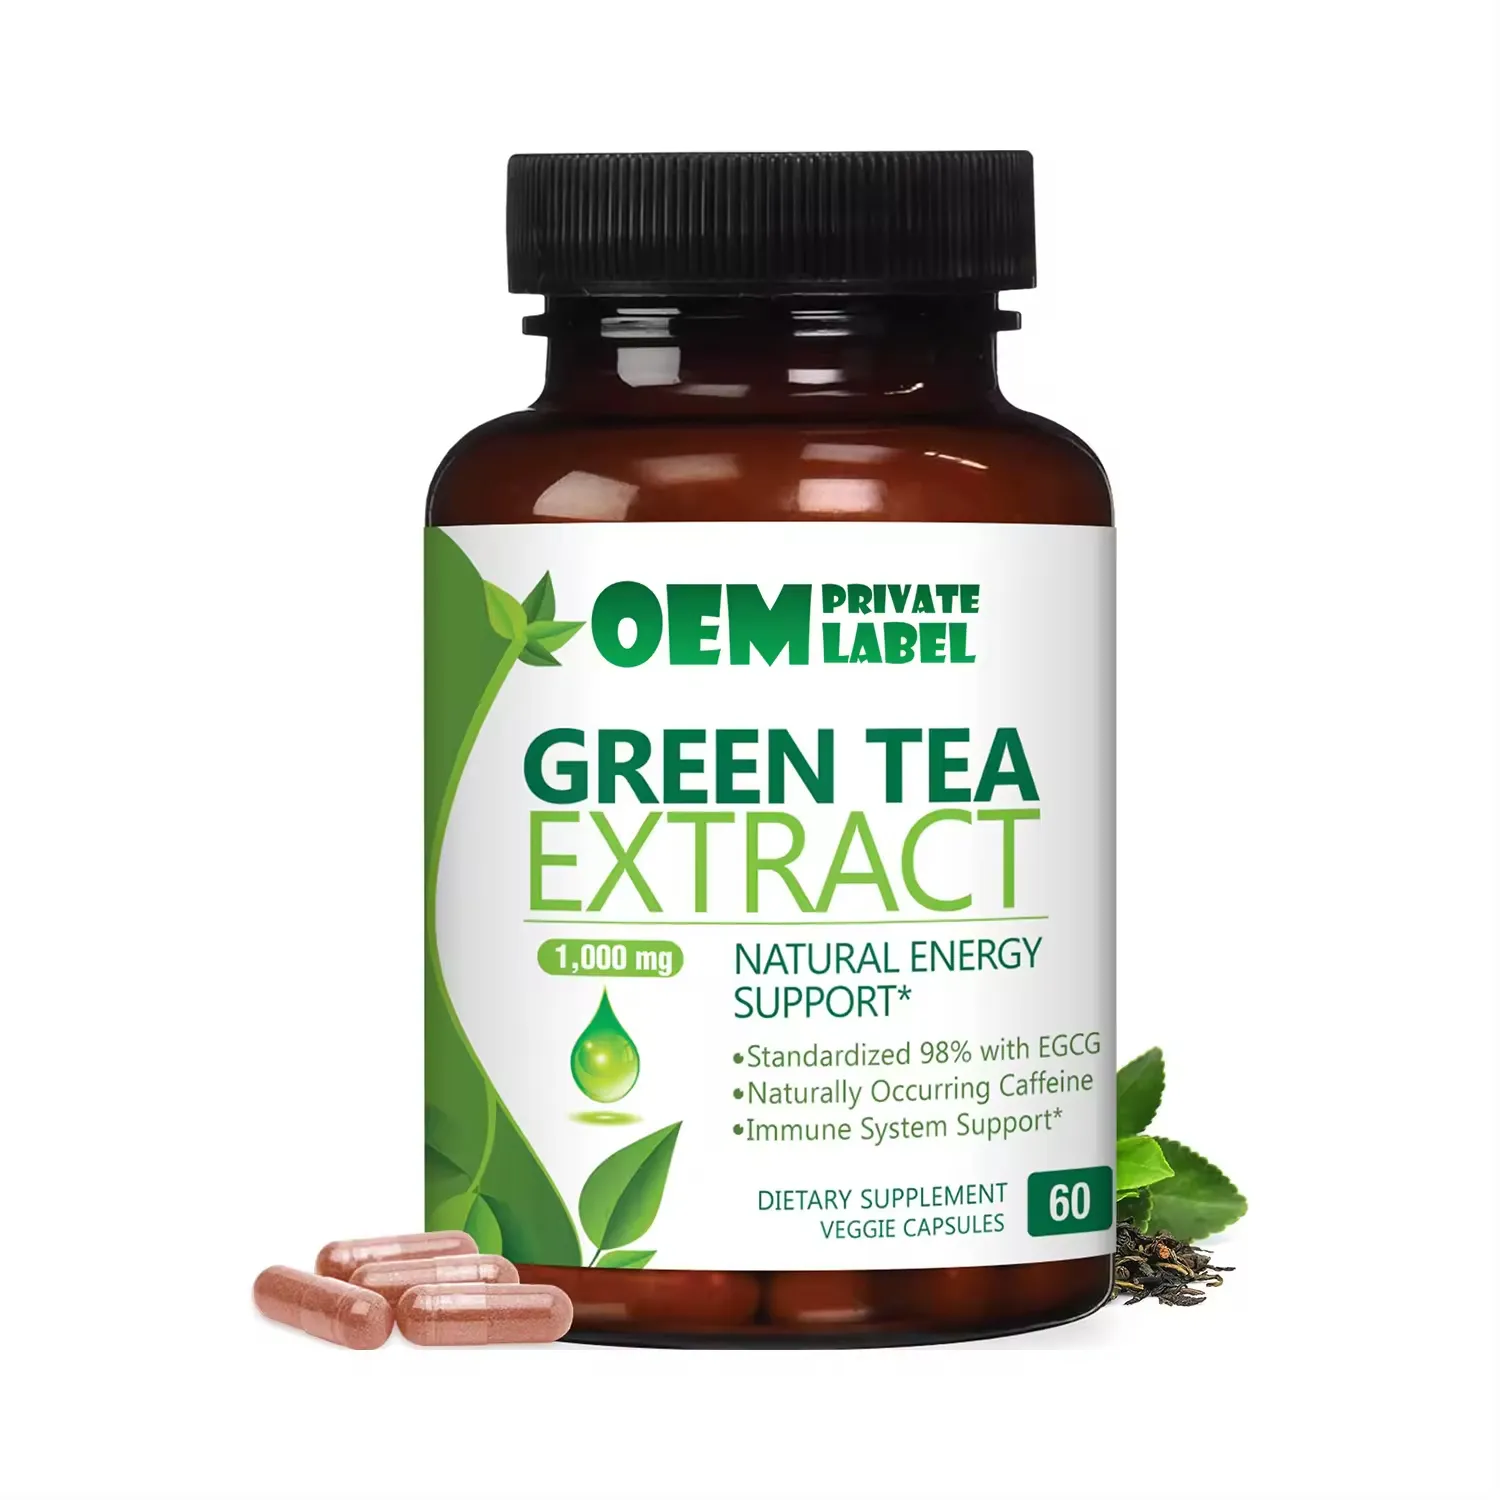 oem Private Label Herbal Health Supplement Green Tea Slimming Capsules Support Heart and Antioxidant Health Green Tea Capsules